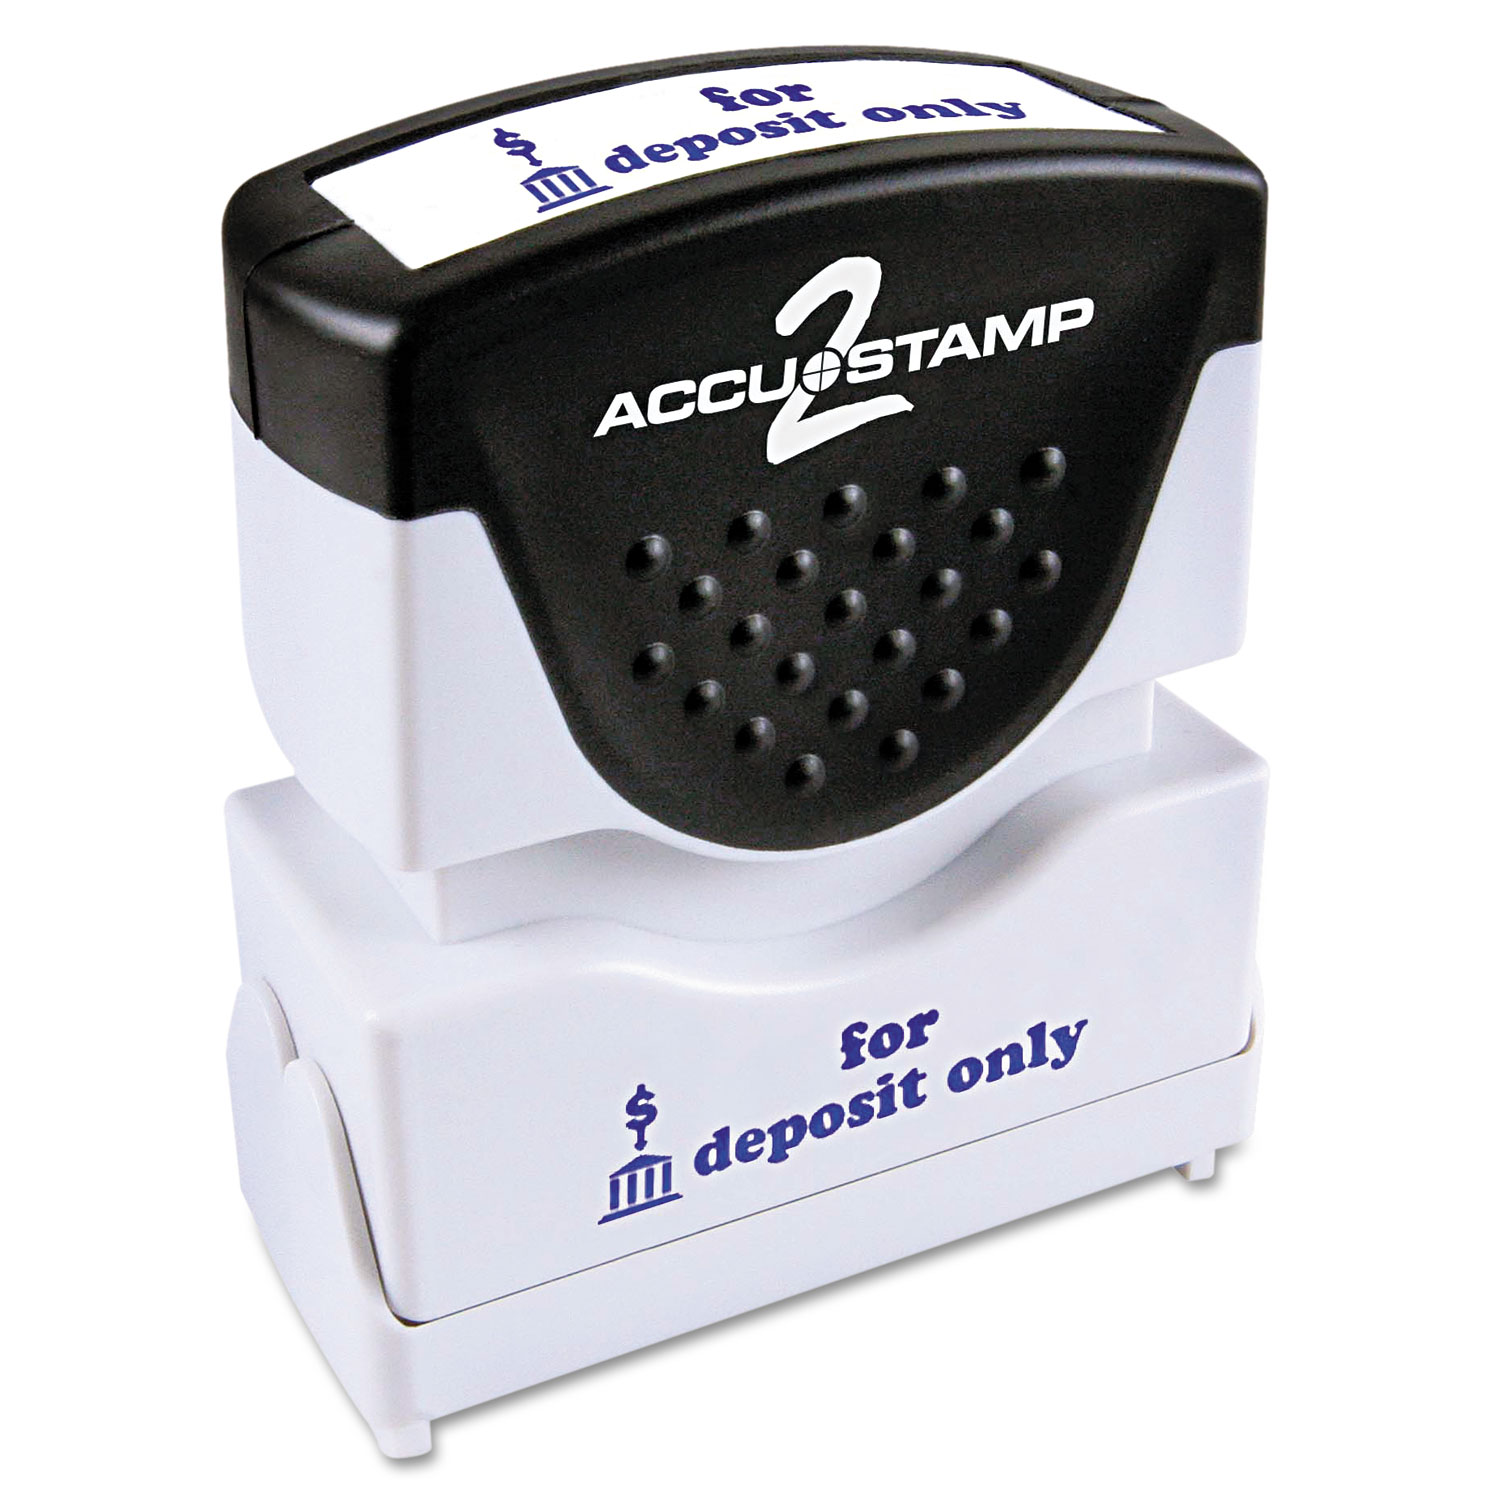  ACCUSTAMP2 035601 Pre-Inked Shutter Stamp, Blue, FOR DEPOSIT ONLY, 1 5/8 x 1/2 (COS035601) 